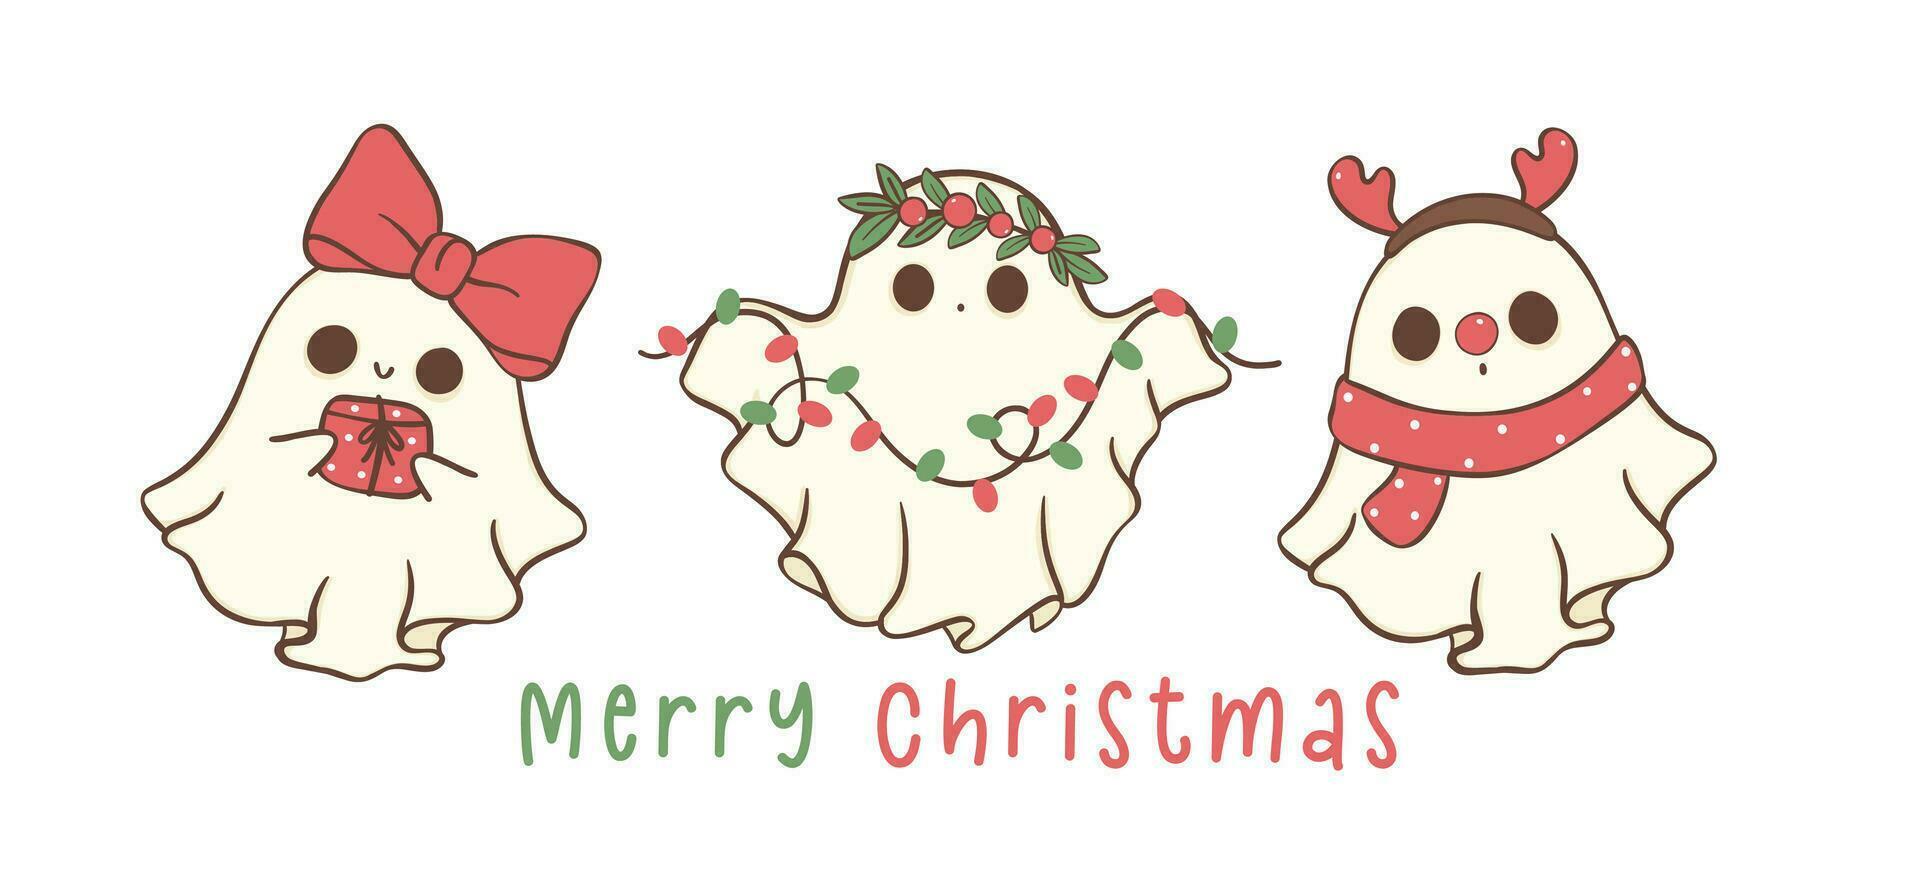 Group of Cute and Kawaii Christmas Ghosts. Festive greeting card banner, Holiday Cartoon Hand Drawing with adorable pose. vector